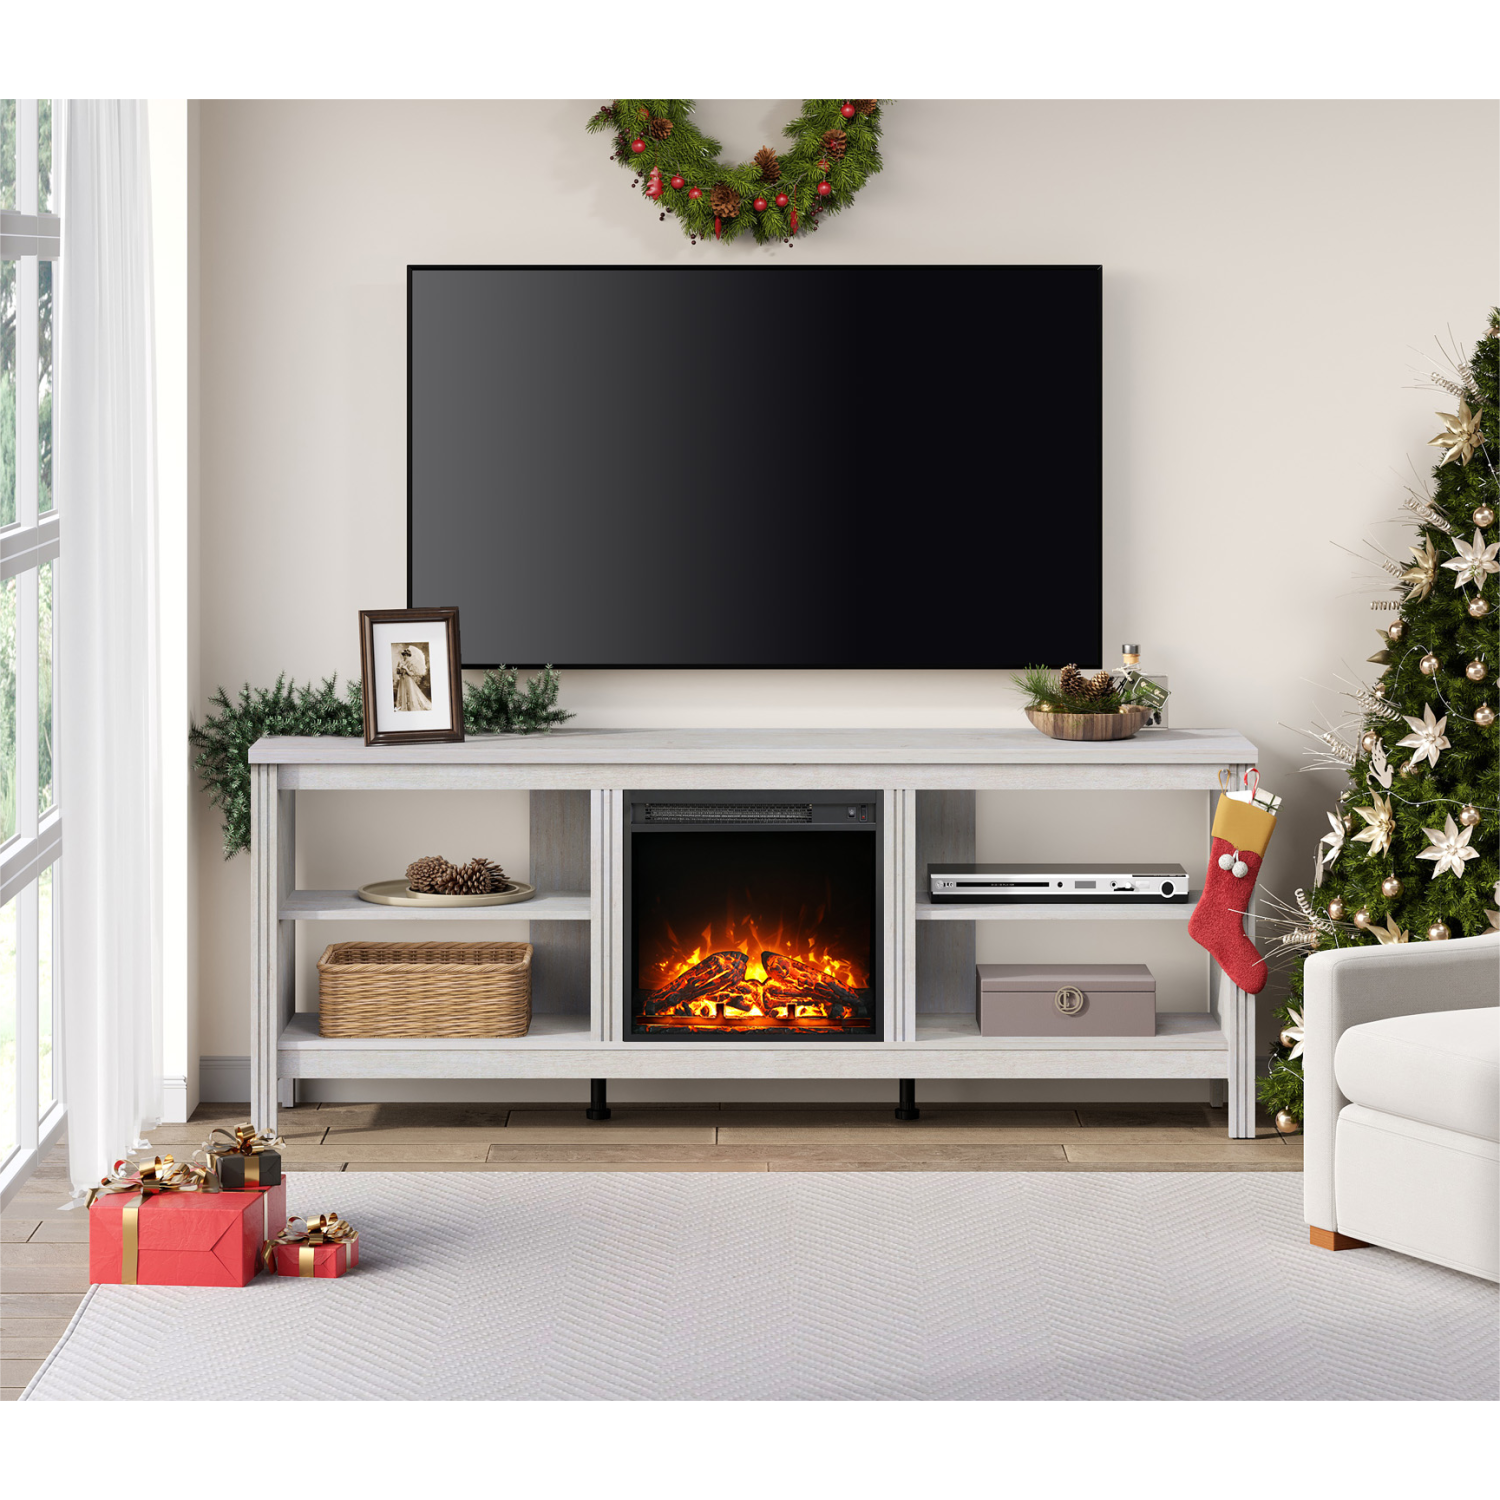 WAMPAT Fireplace TV Stand for 75 Inch TV Entertainment Center, Electric Fire Place Wood TV Console Table Cabinet with 4 Storages for Living Room Bedroom,70'' White